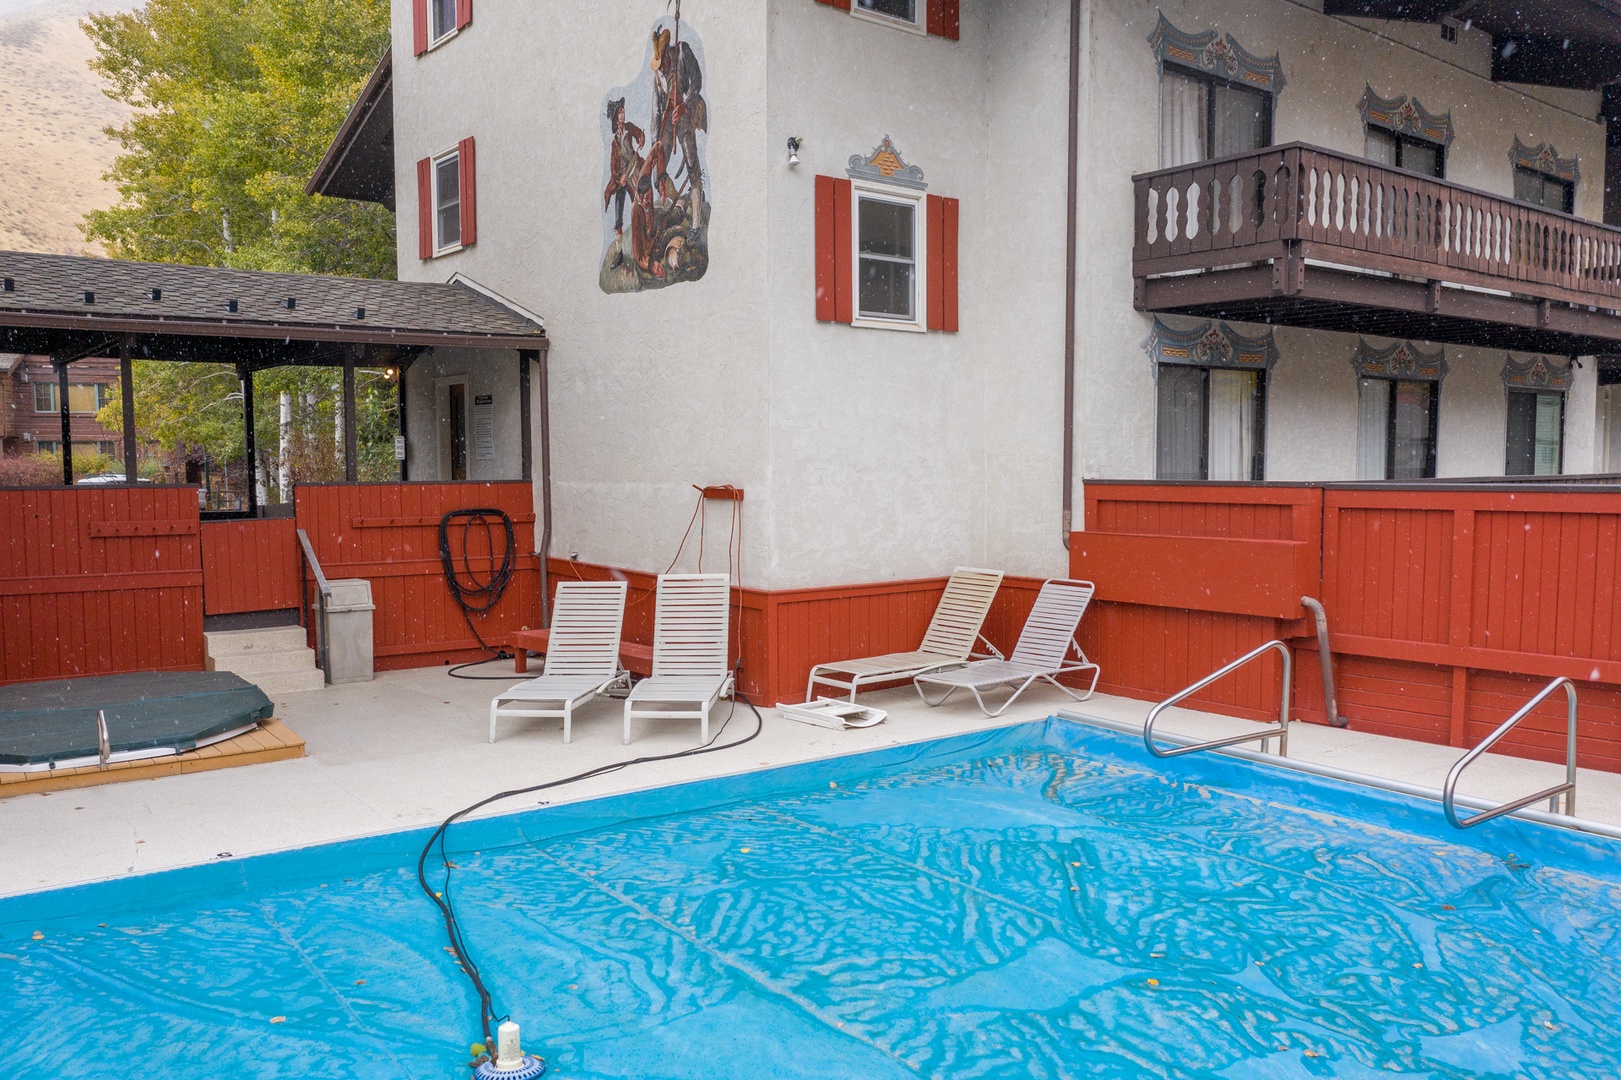 Ketchum Vacation Rentals, Bavarian Warm Springs Charm - Pool for relaxing summer days